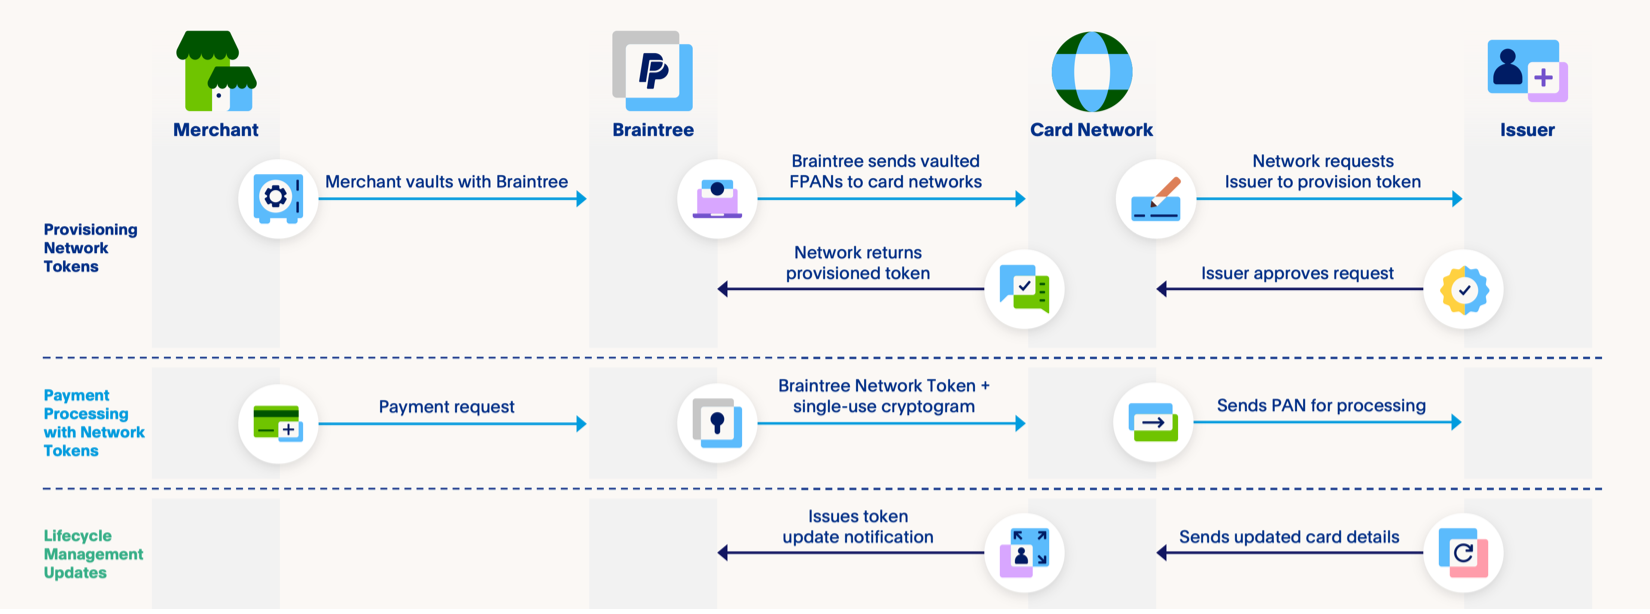 network-tokens-how-it-works